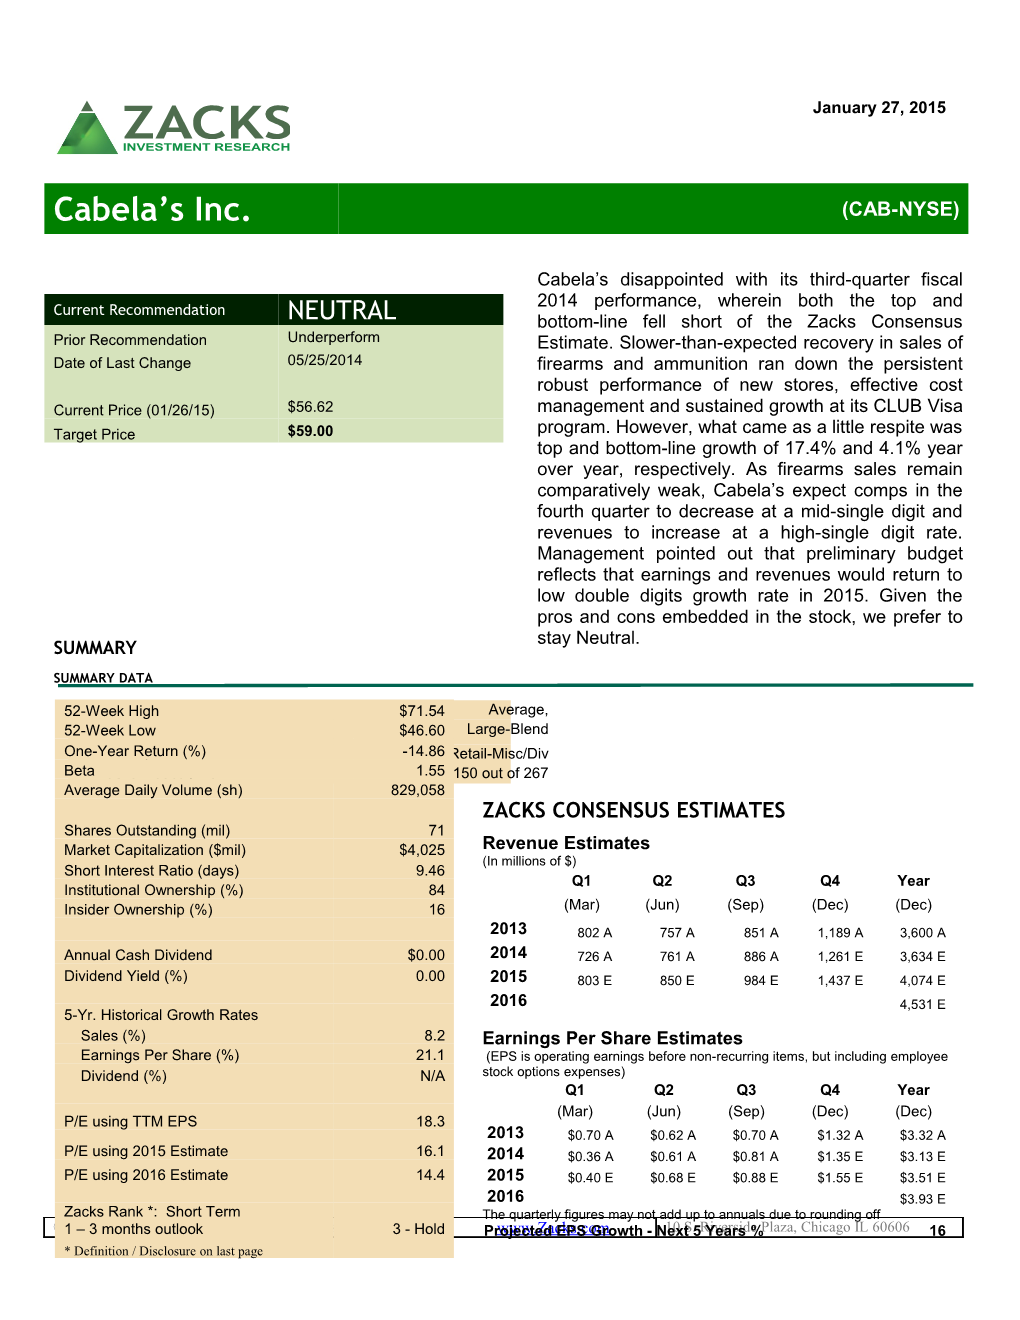 Cabela S Operates Three Business Segments Retail, Direct and Financial Services